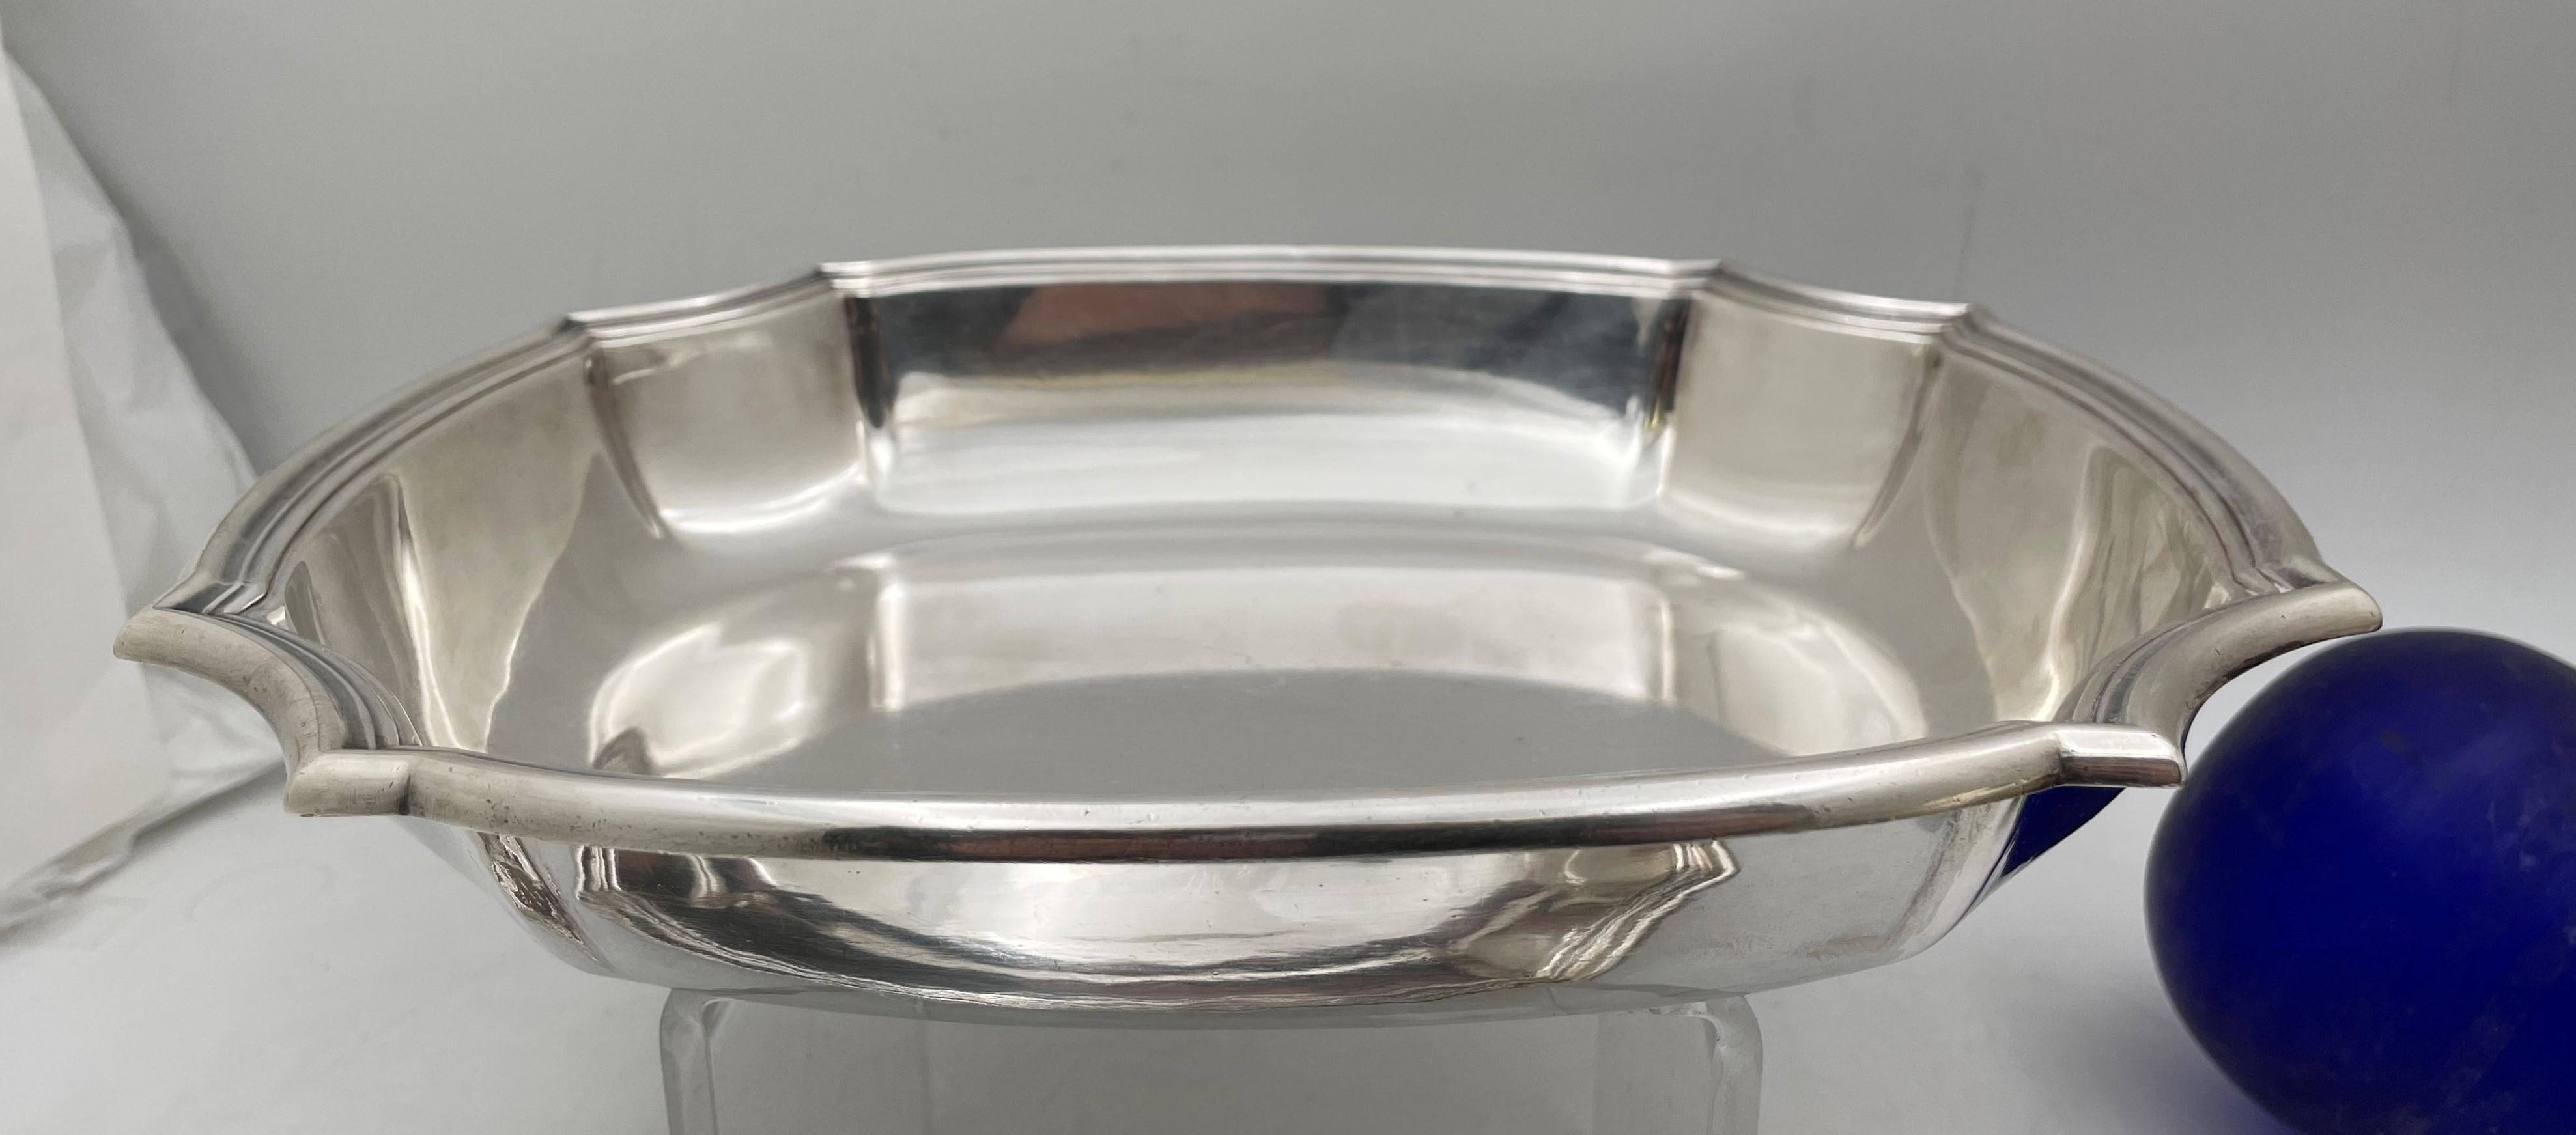 Pair of Emile Puiforcat, French 0.950 (higher purity than sterling) silver vegetable bowls in Art Deco style, from the early 20th century, in beautiful, geometrically-inspired design, measuring 10 1/2'' in length by 8 7/8'' in width by 1 7/8'' in